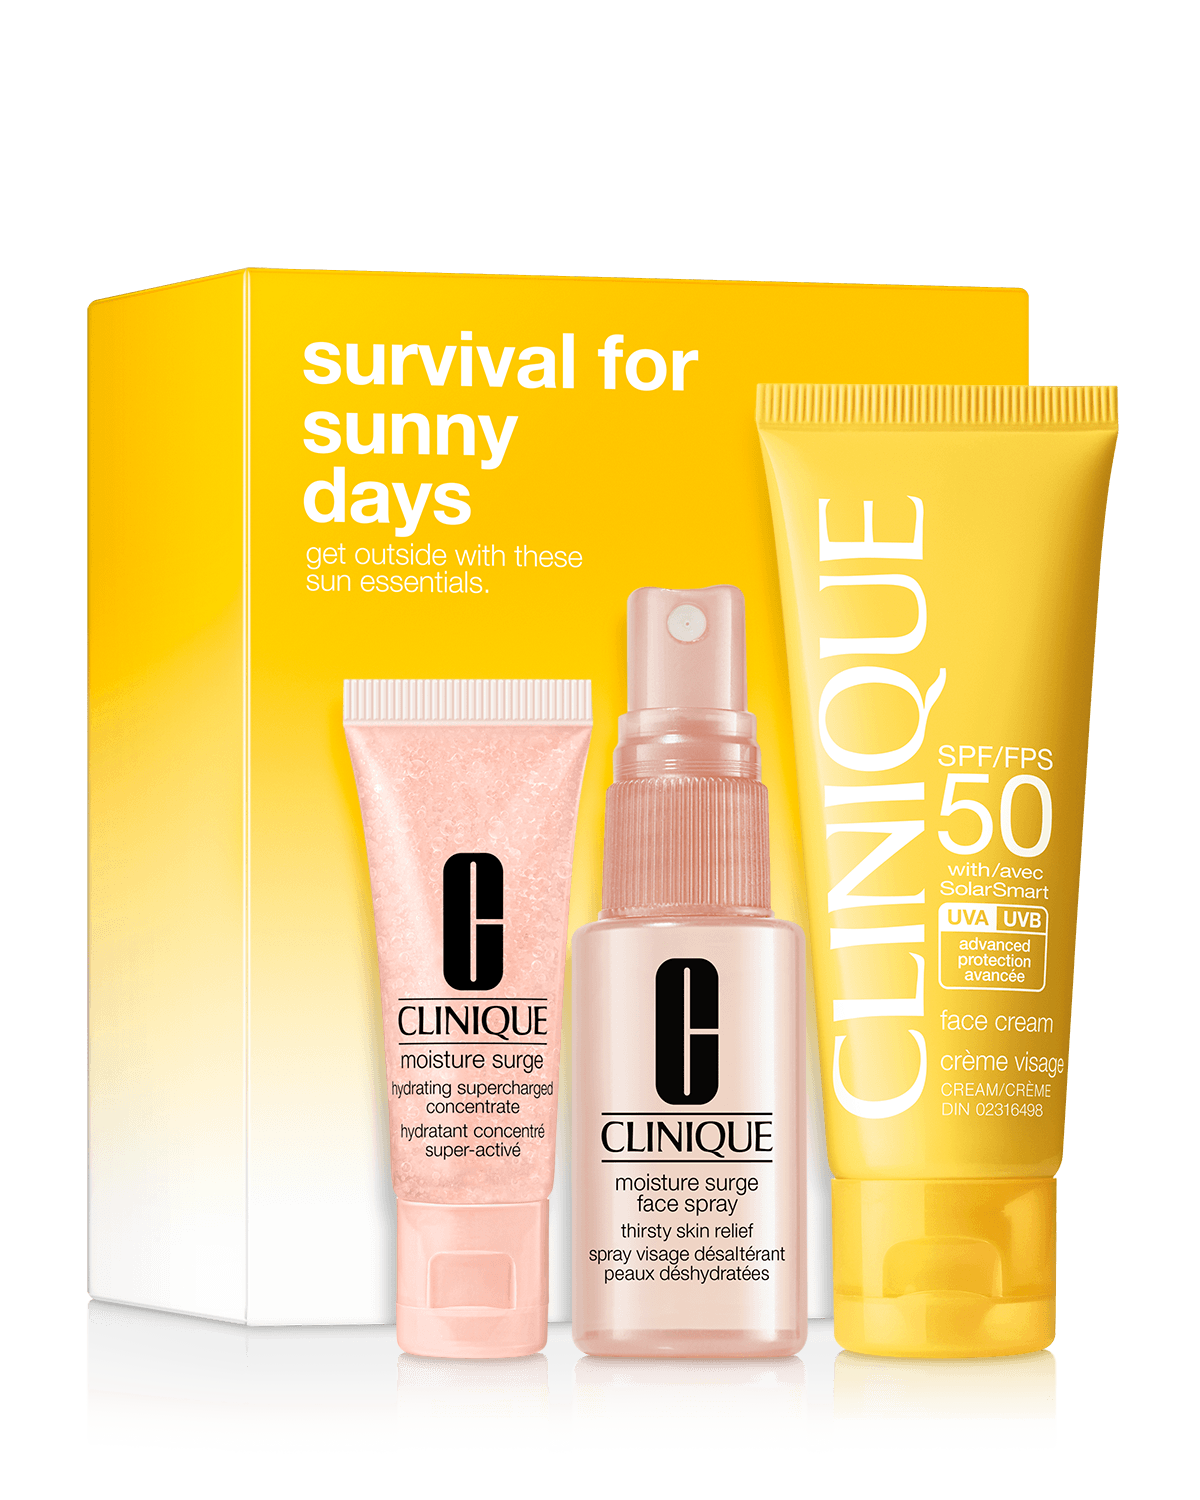 SURVIVAL FOR SUNNY DAYS